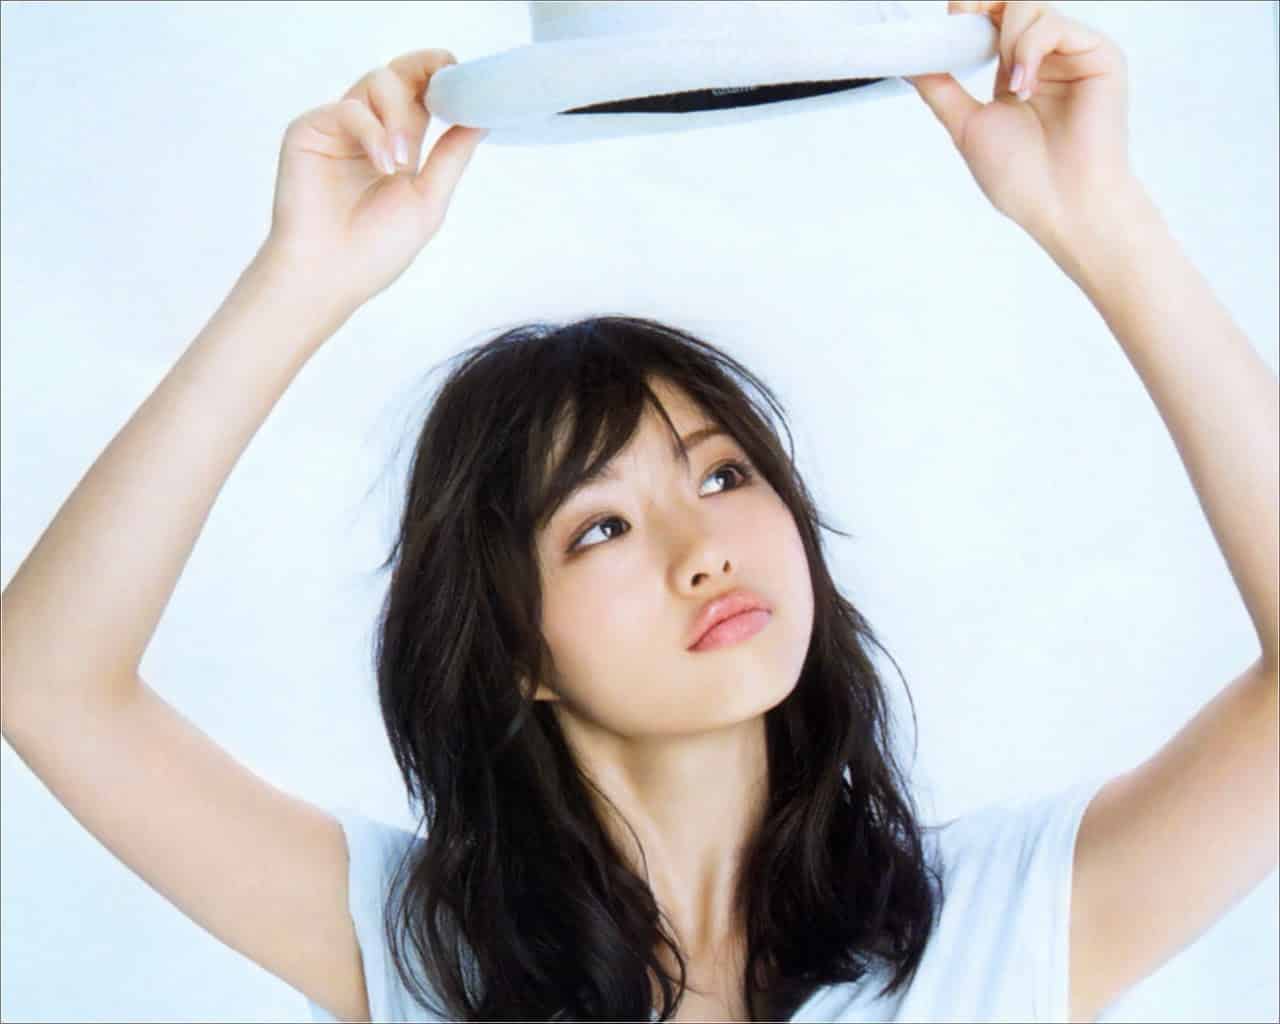 Top 10 Most Beautiful Japanese Actresses in 2015